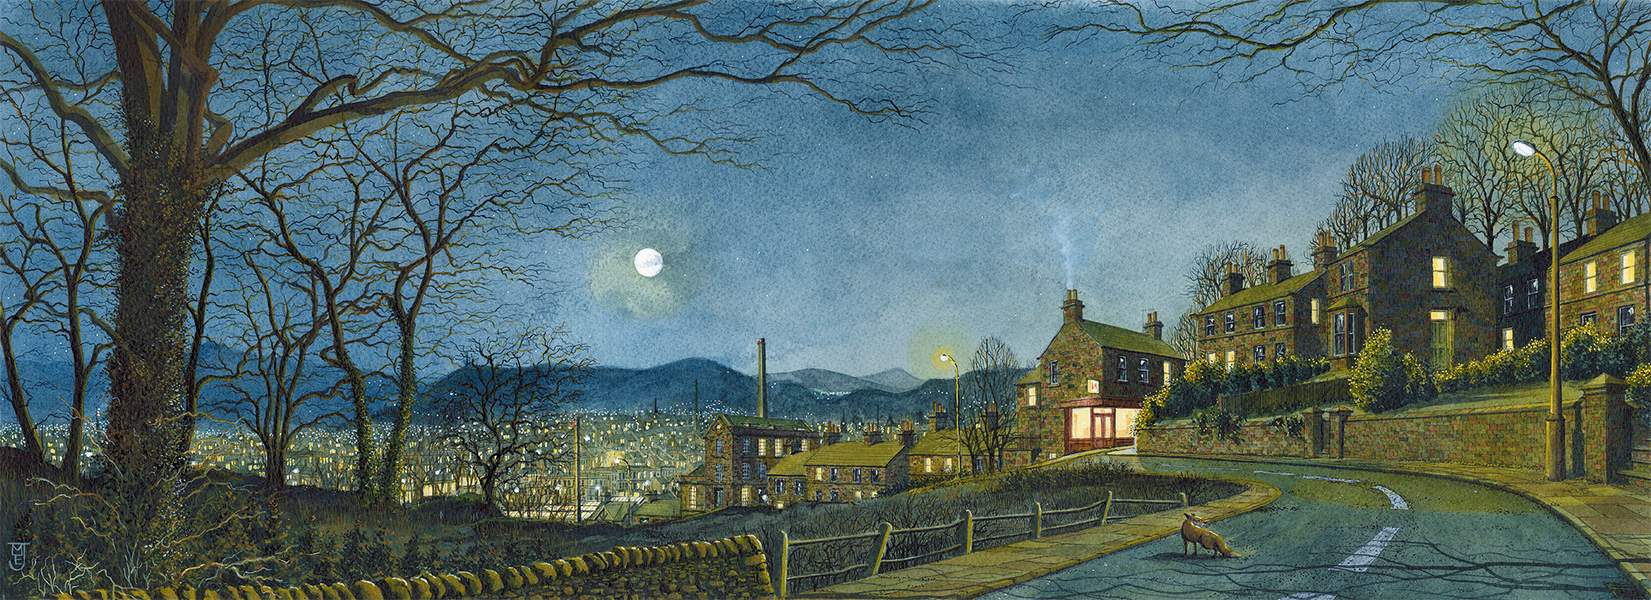 Coming Into Town on a December Evening an original painting by Matthew Eyles. 